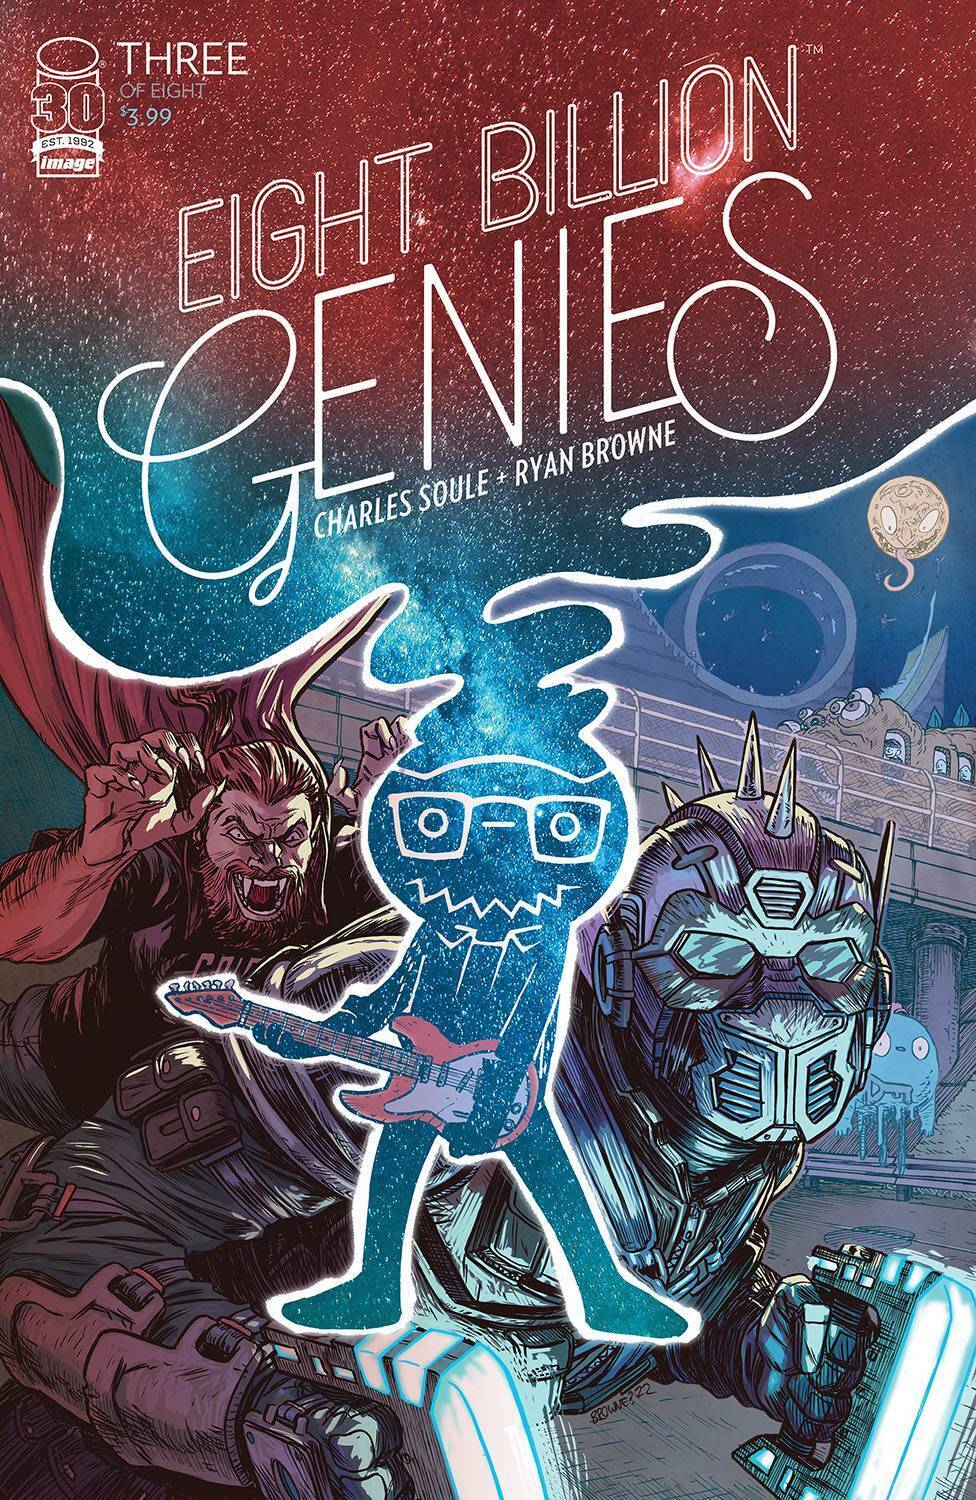 Eight Billion Genies #1-5 | Select Covers | Image NM 2022